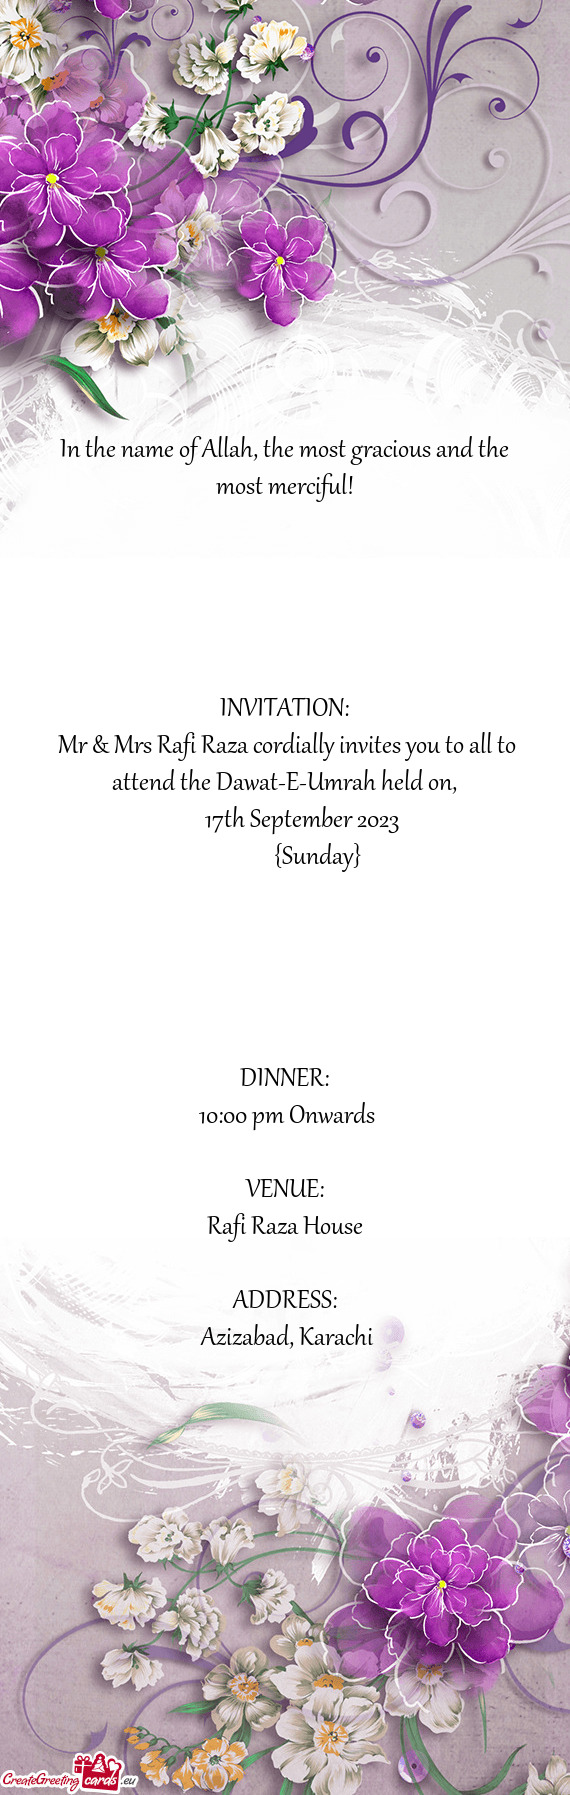 Mr & Mrs Rafi Raza cordially invites you to all to attend the Dawat-E-Umrah held on